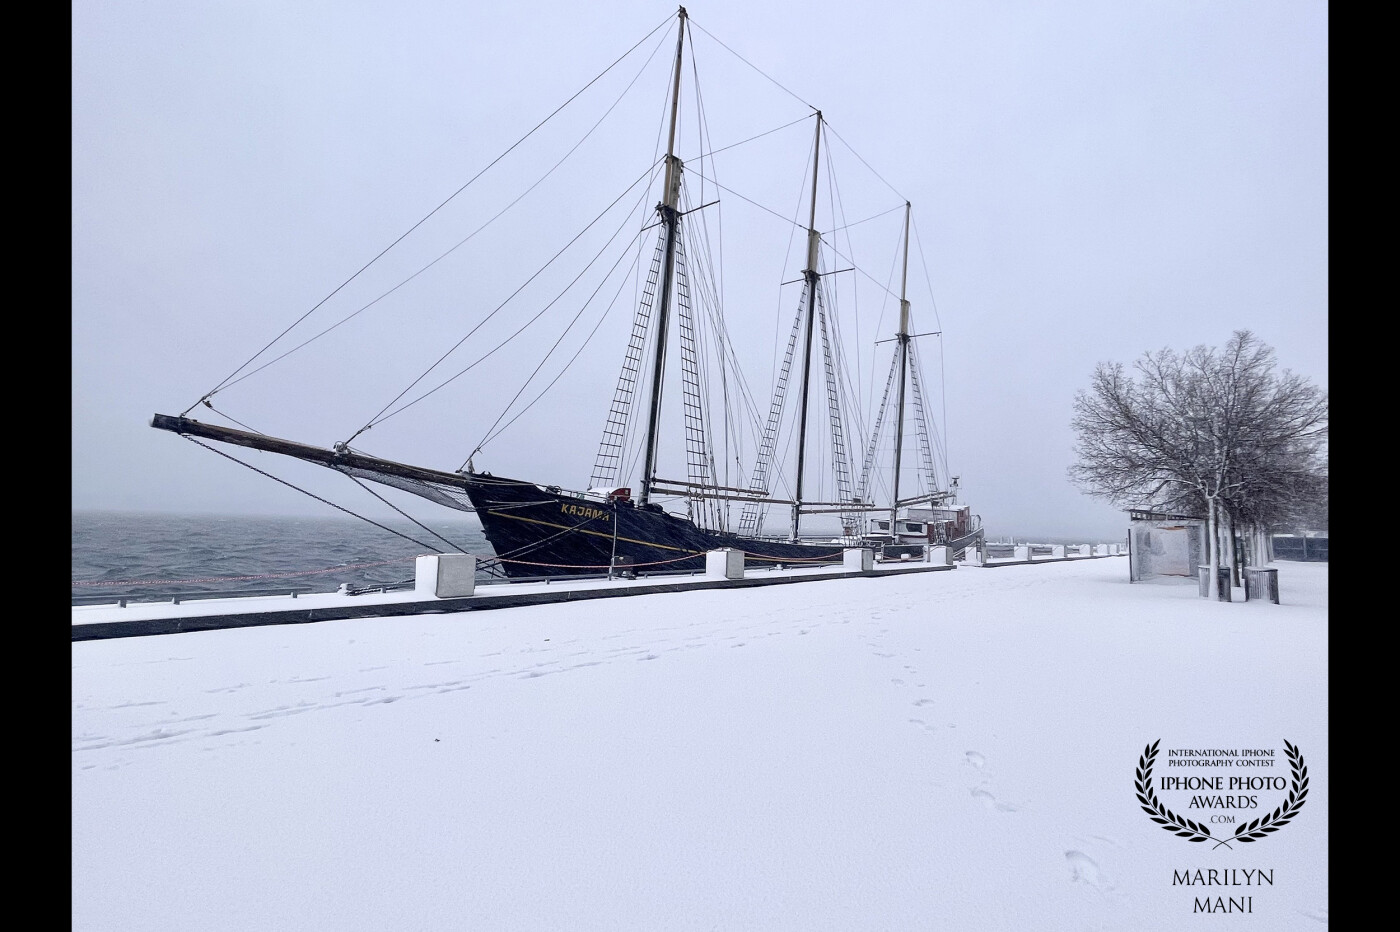 No snowstorm could stop me from capturing this beautiful view on a cold day at Harbourfront, Toronto. My fav neighbourhood boat - the Kajama stands there in all its glory !